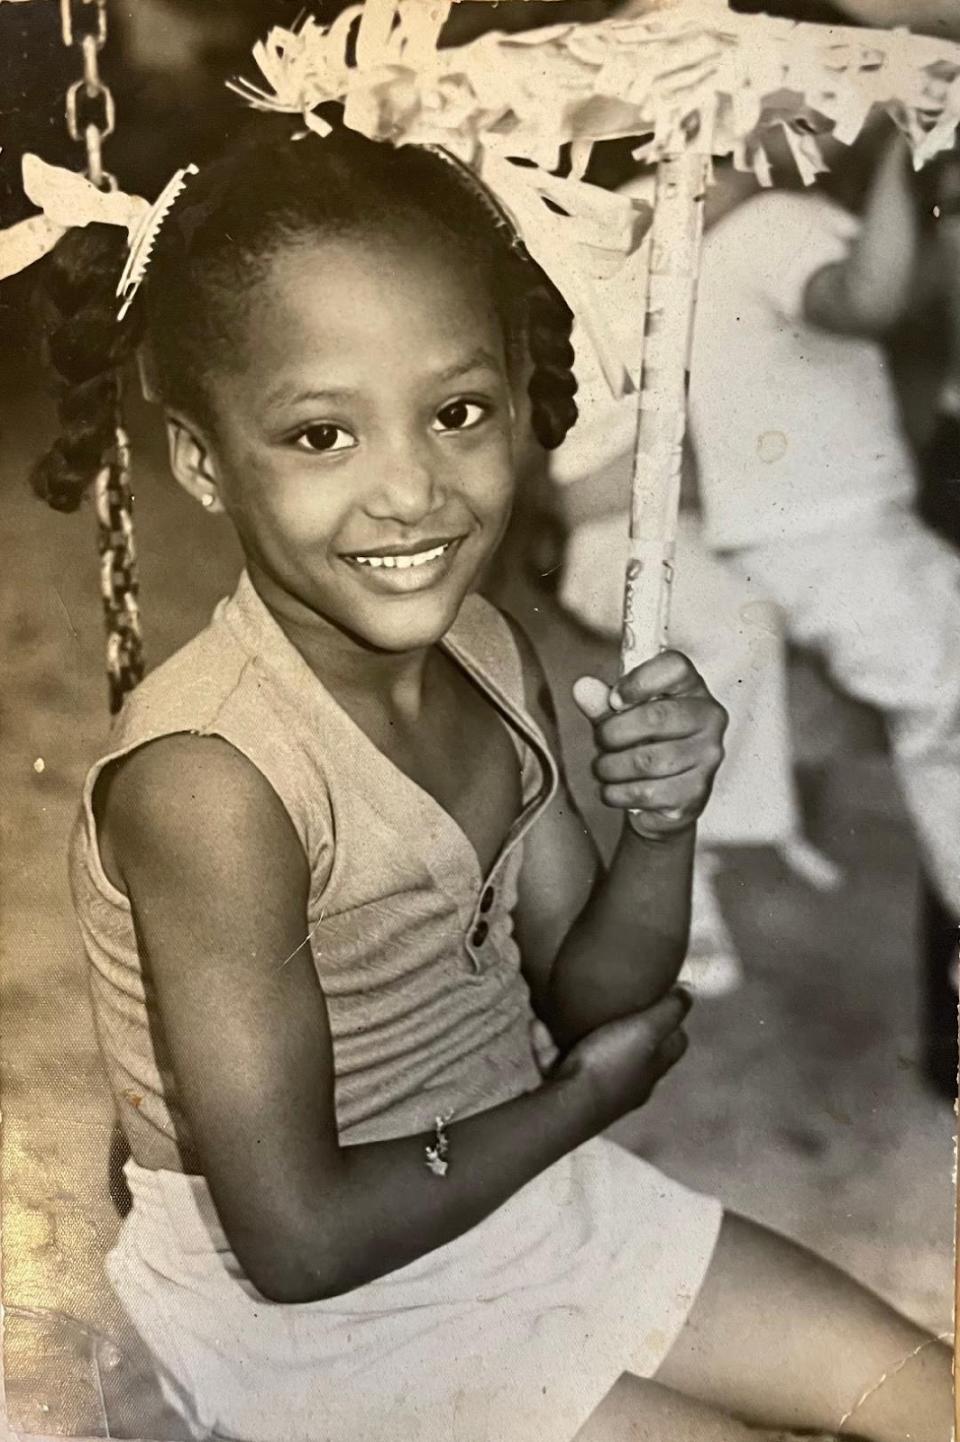 Annia Hatch as a child in Cuba (Courtesy of the athlete)